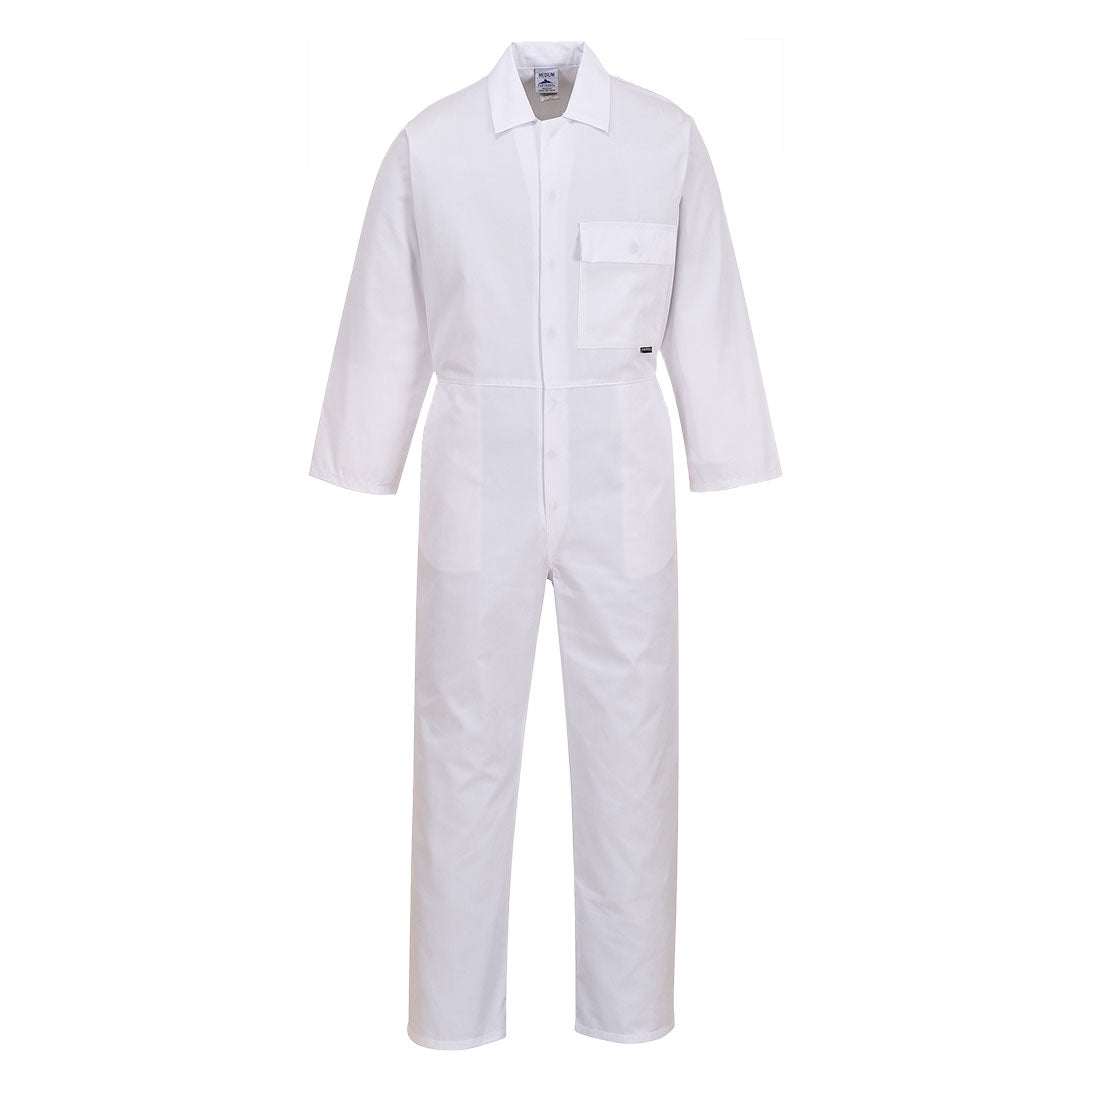 Portwest 2802 Standard Coverall for General Workwear